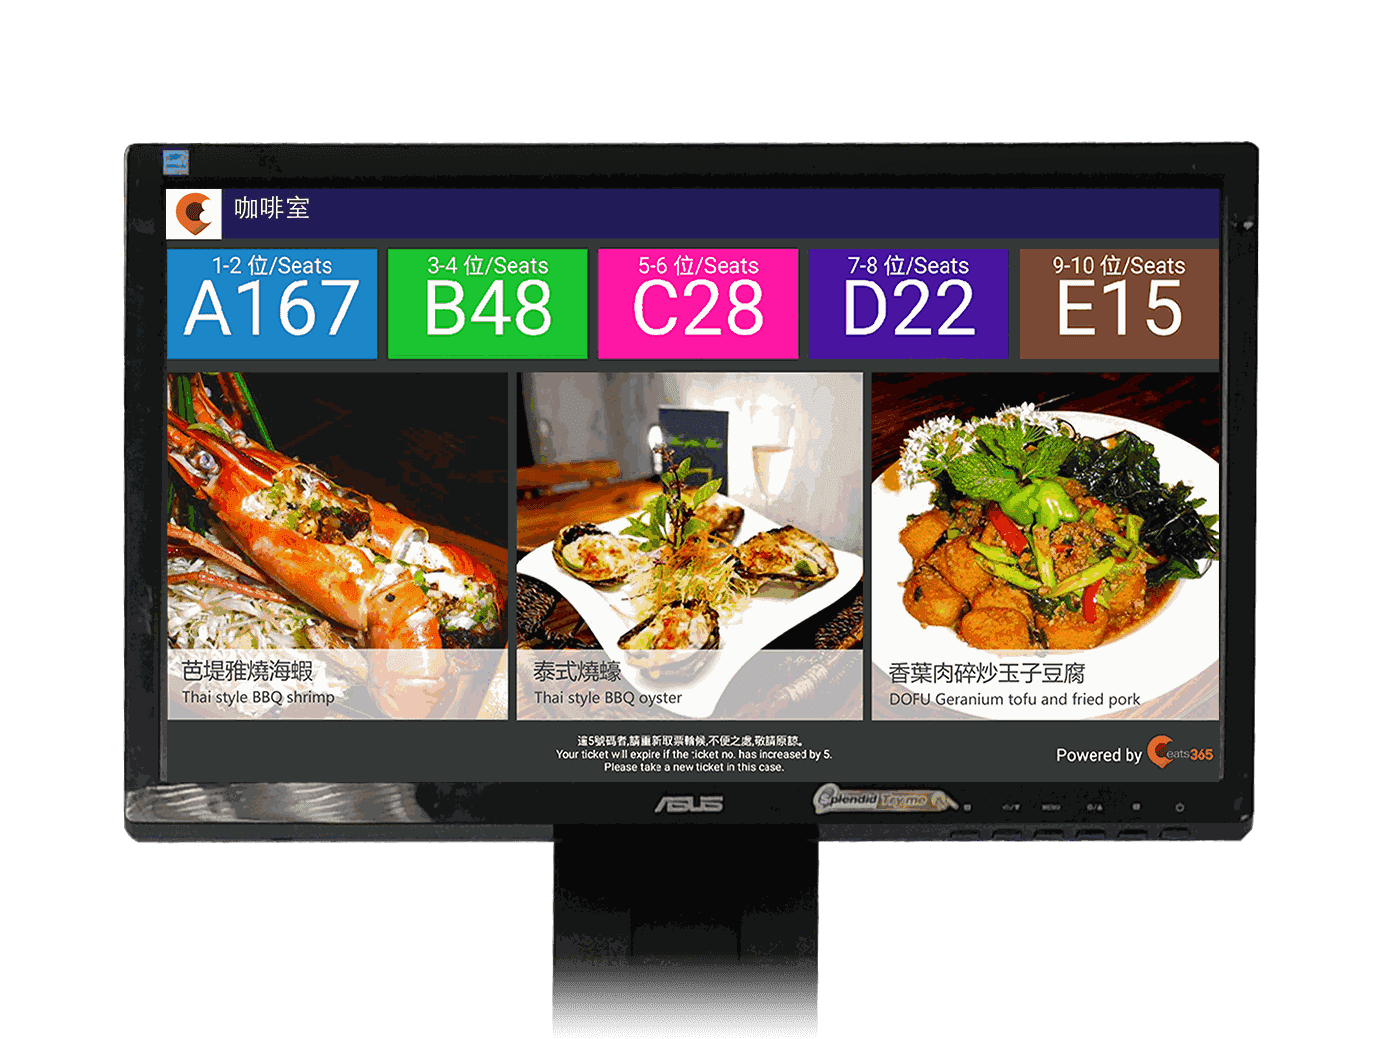 Part of Eats365’s eSignage user interface.